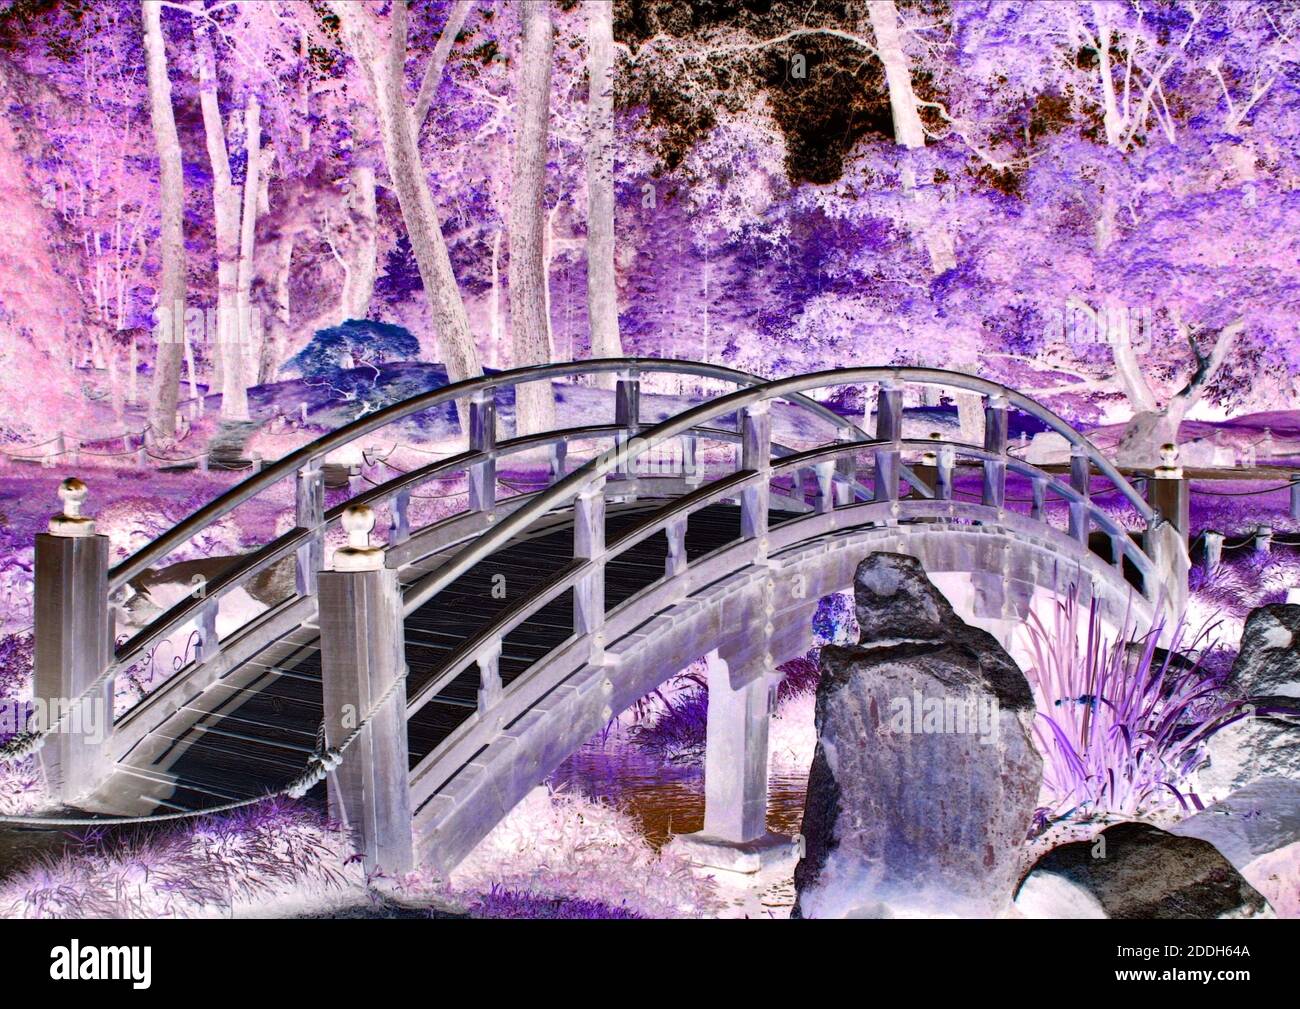 Lovely old bridge in a japanese style garden with colour inversions and enhancements from original image. Stock Photo